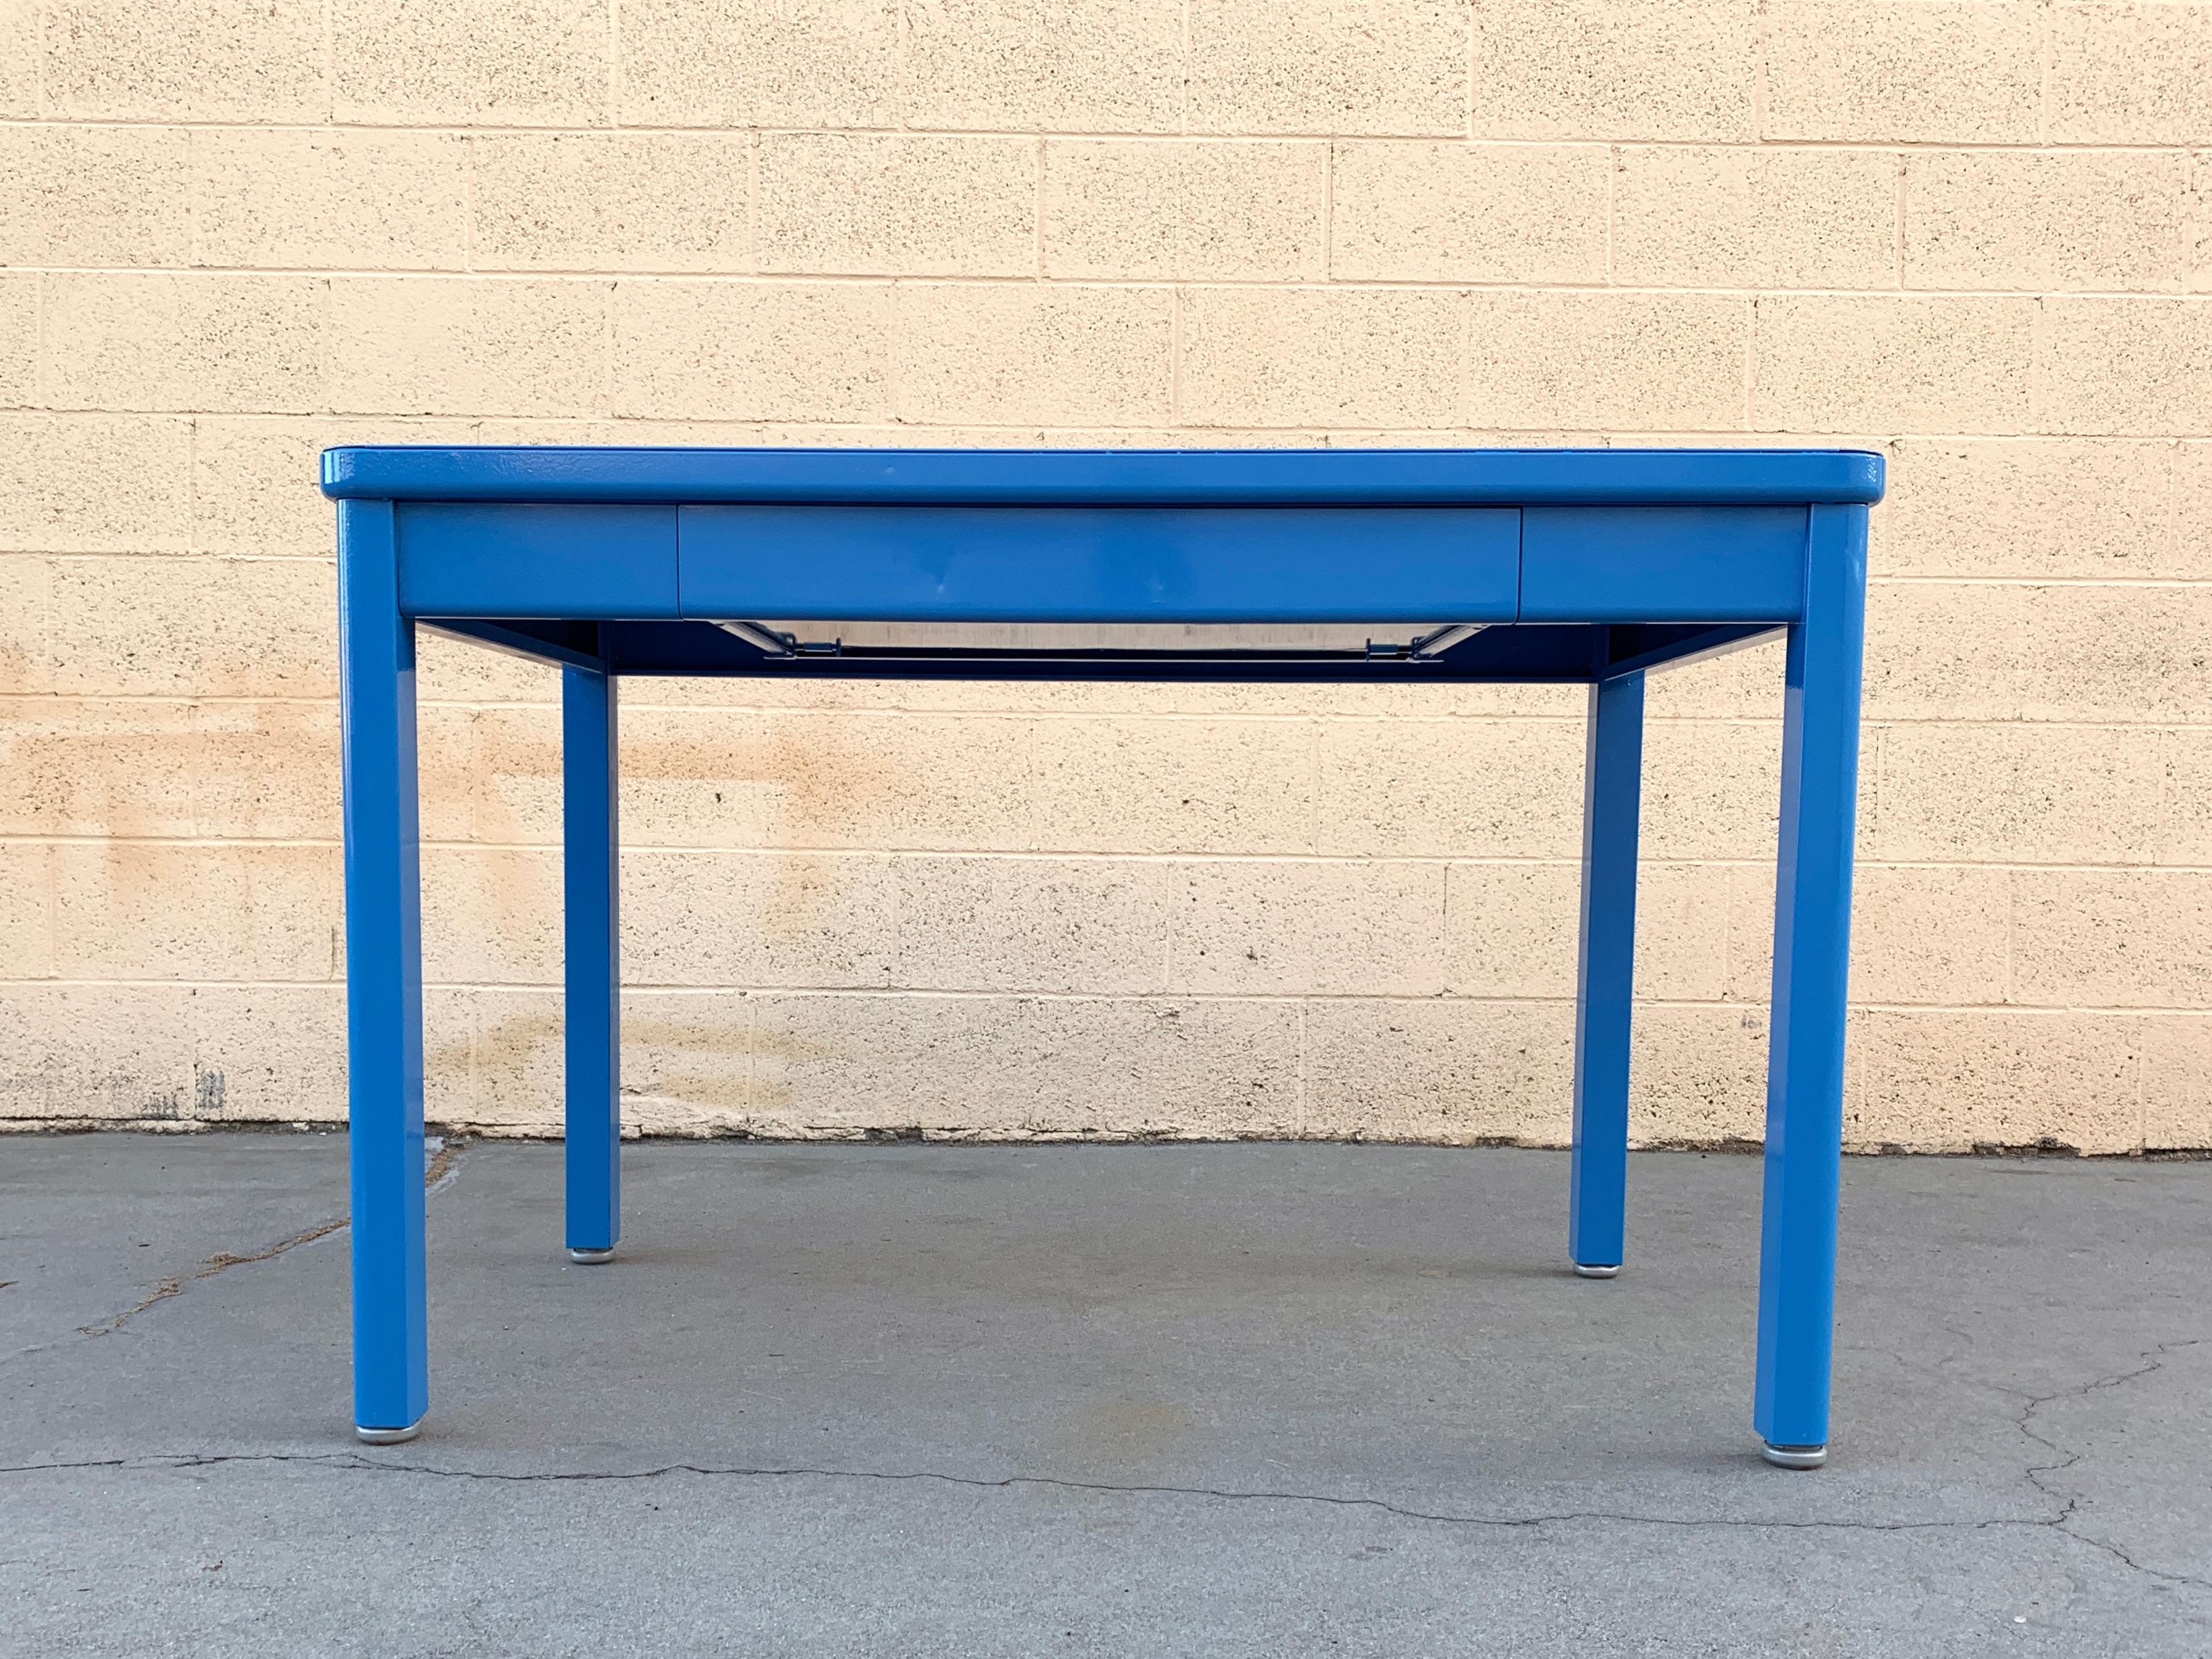 Midcentury Steelcase 4-legged table with drawer refinished in a powder coated pop of bright blue (RAL5012). This streamlined and practical tanker table is ideal in a workspace, office or library. Steel is in very good refinished vintage condition